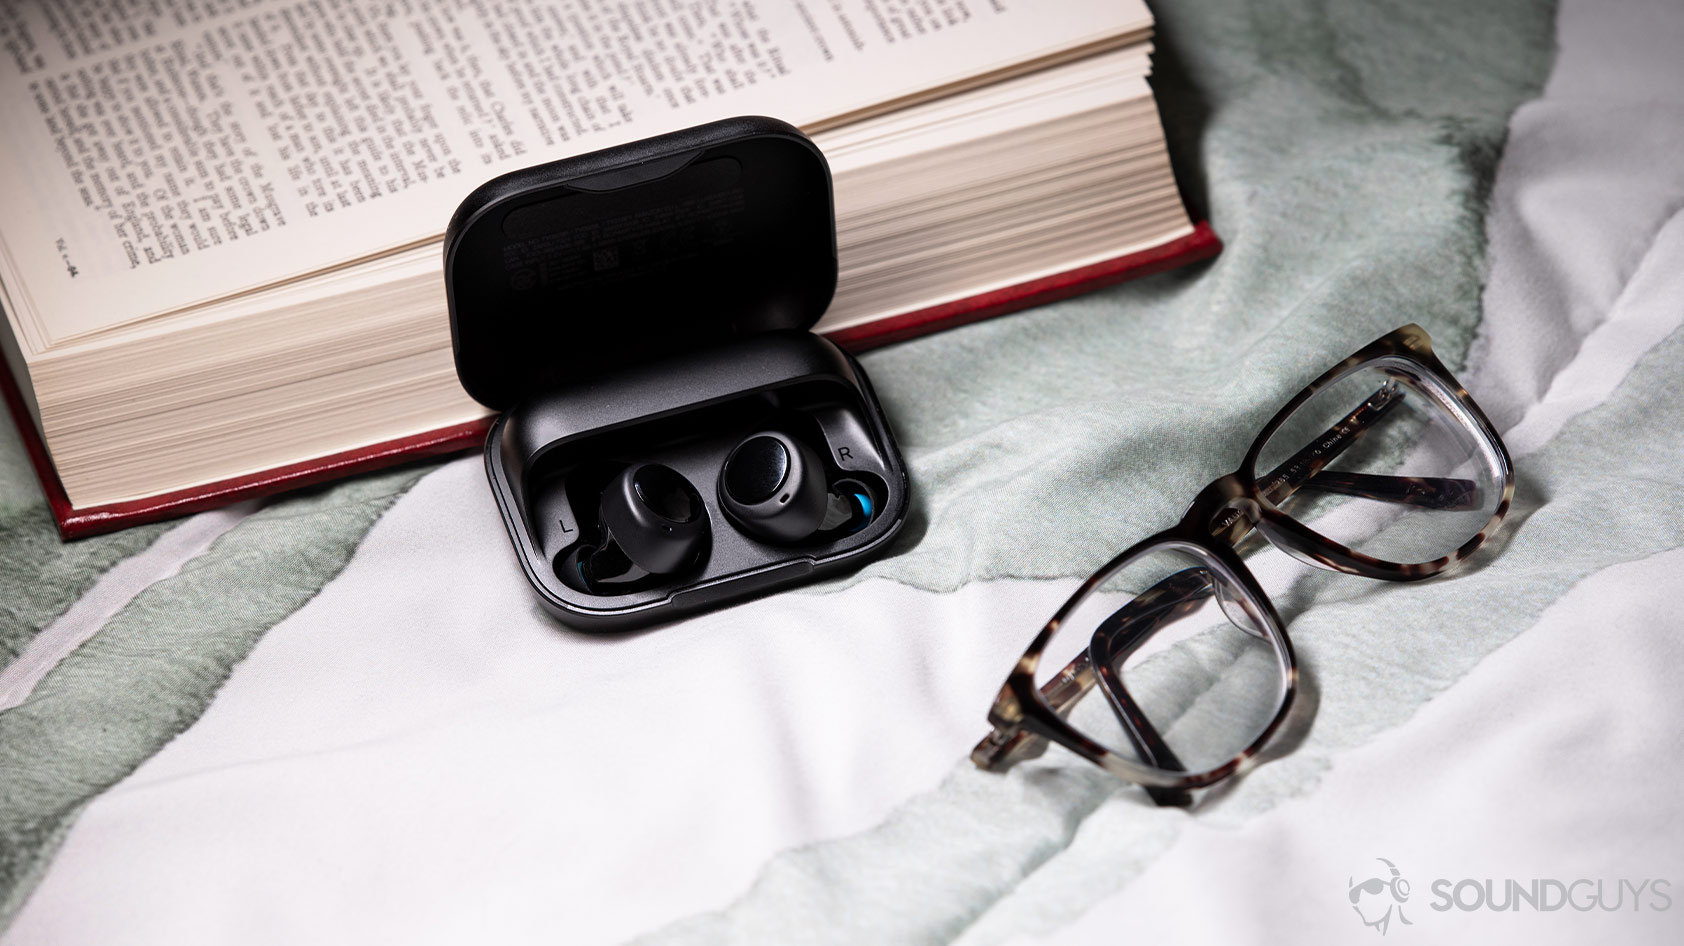 A picture of the Amazon Echo Buds in the case next to glasses and a book.